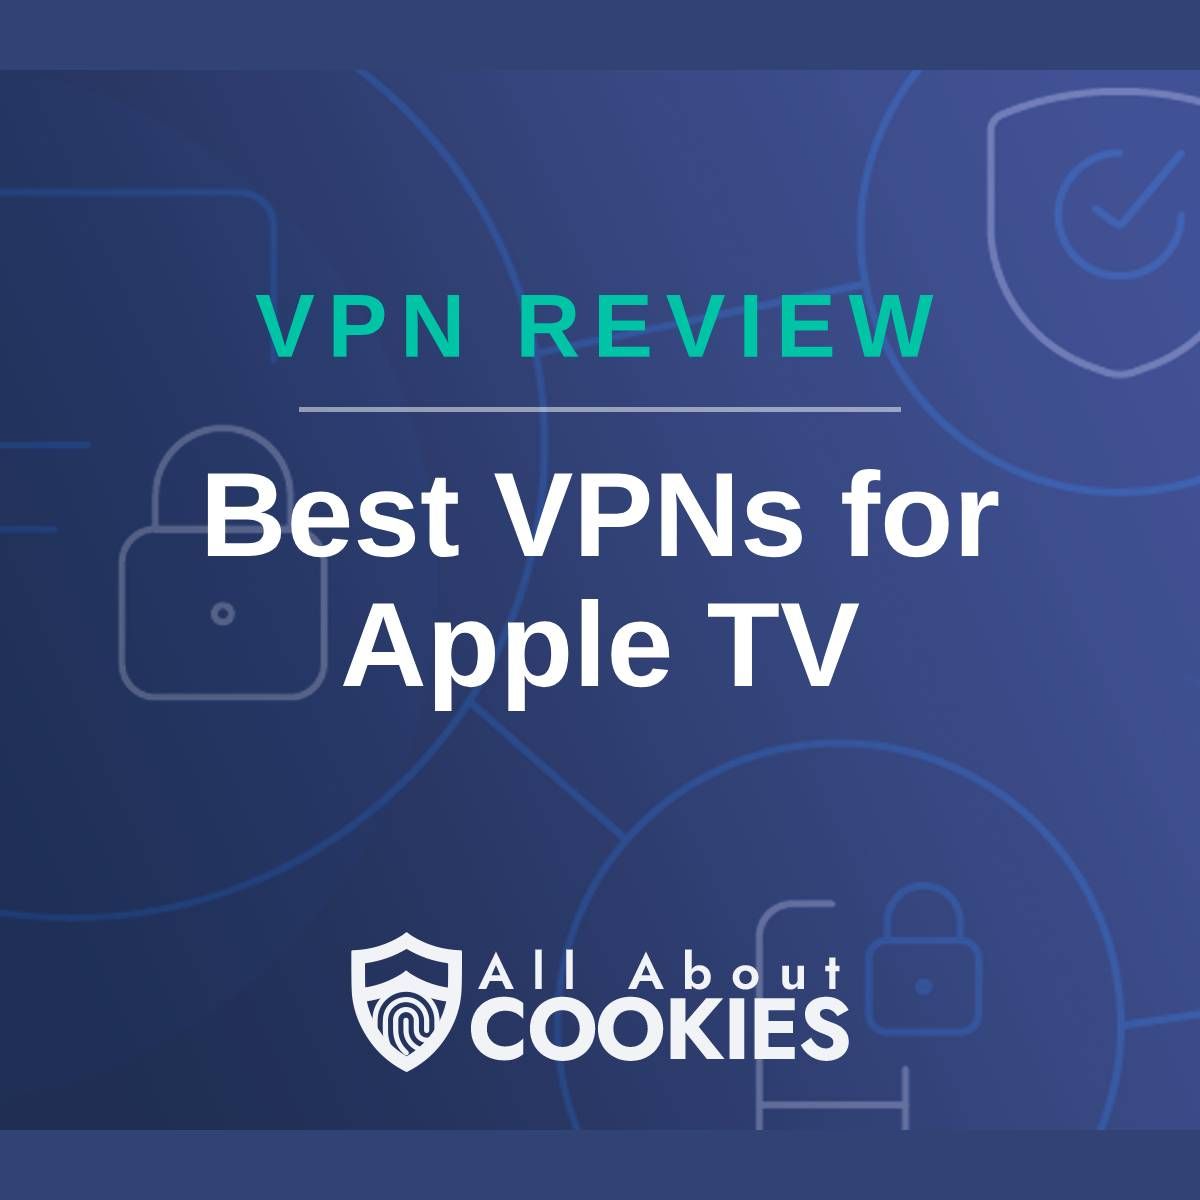 A blue background with images of locks and shields with the text &quot;VPN Review best VPNs for Apple TV&quot; and the All About Cookies logo. 